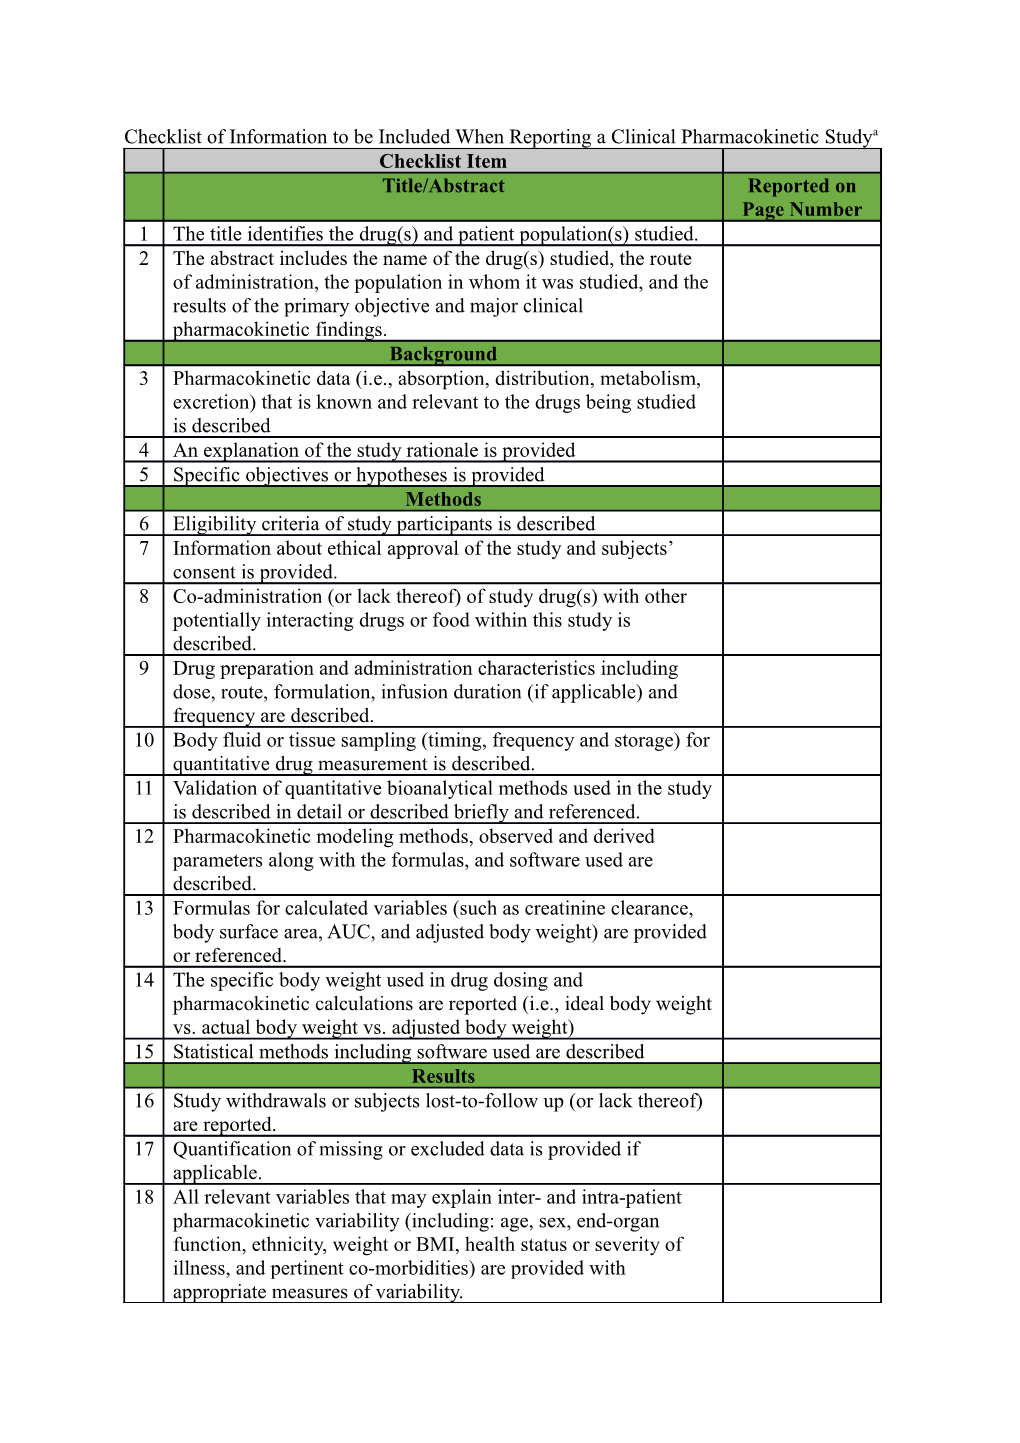 Checklist of Information to Be Included When Reporting a Clinical Pharmacokinetic Studya